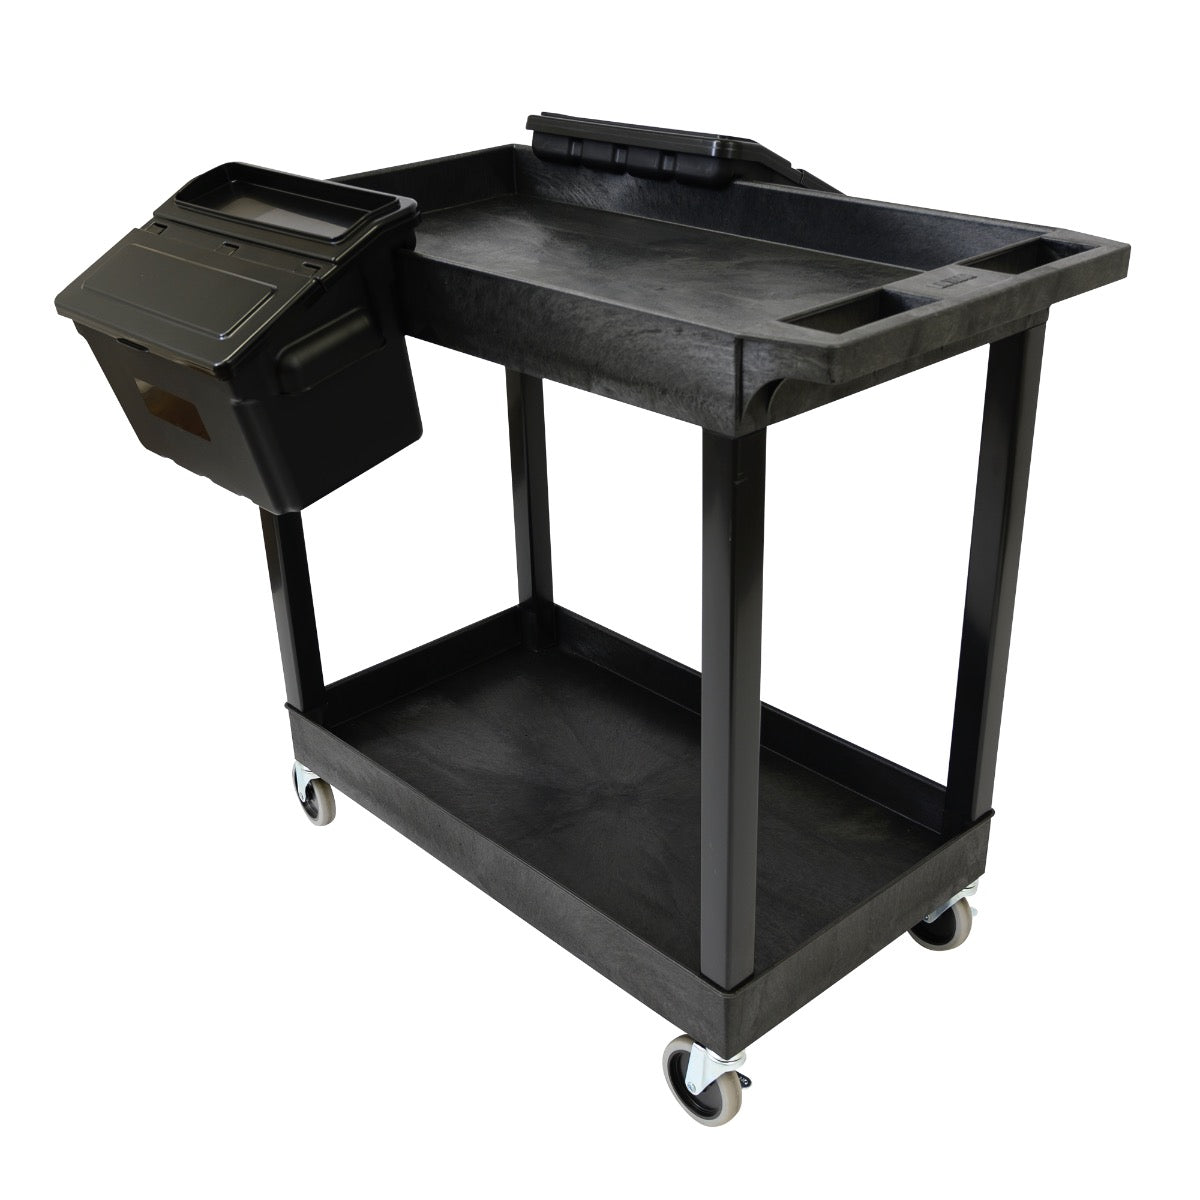 Luxor E Series EC11-B-OUTRIG - Tub Cart 2 Shelves with Outrigger Utility Cart Bins - 35.25" W x 34.25" H - SchoolOutlet